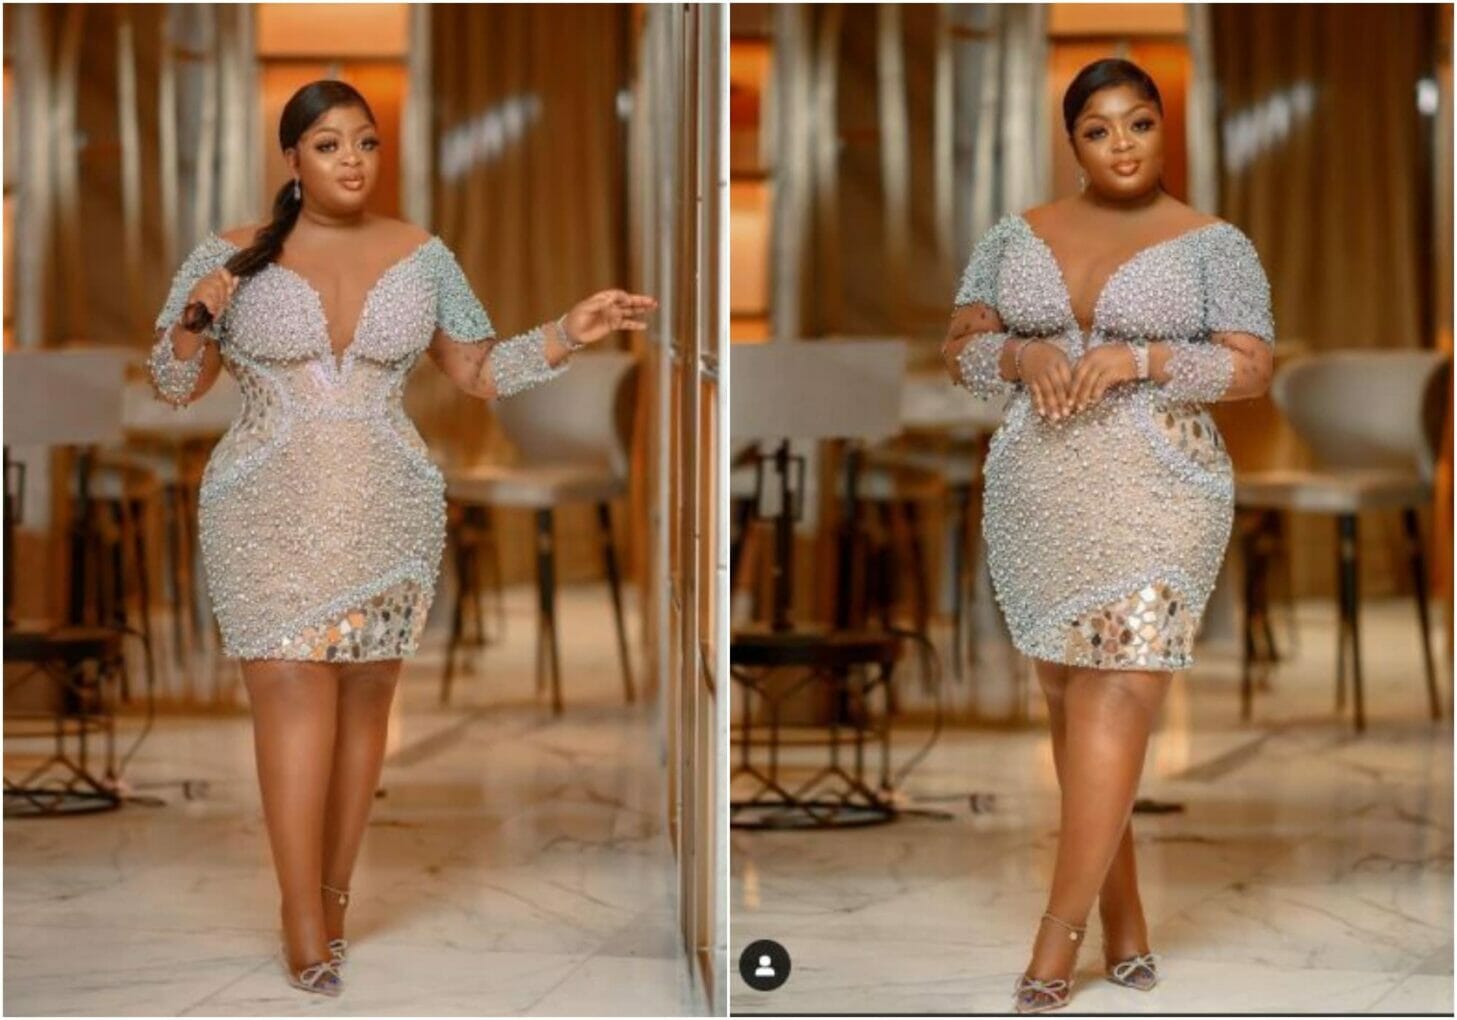 Actress Eniola Badmus warns as she continues to 'press necks' with photos of her new body